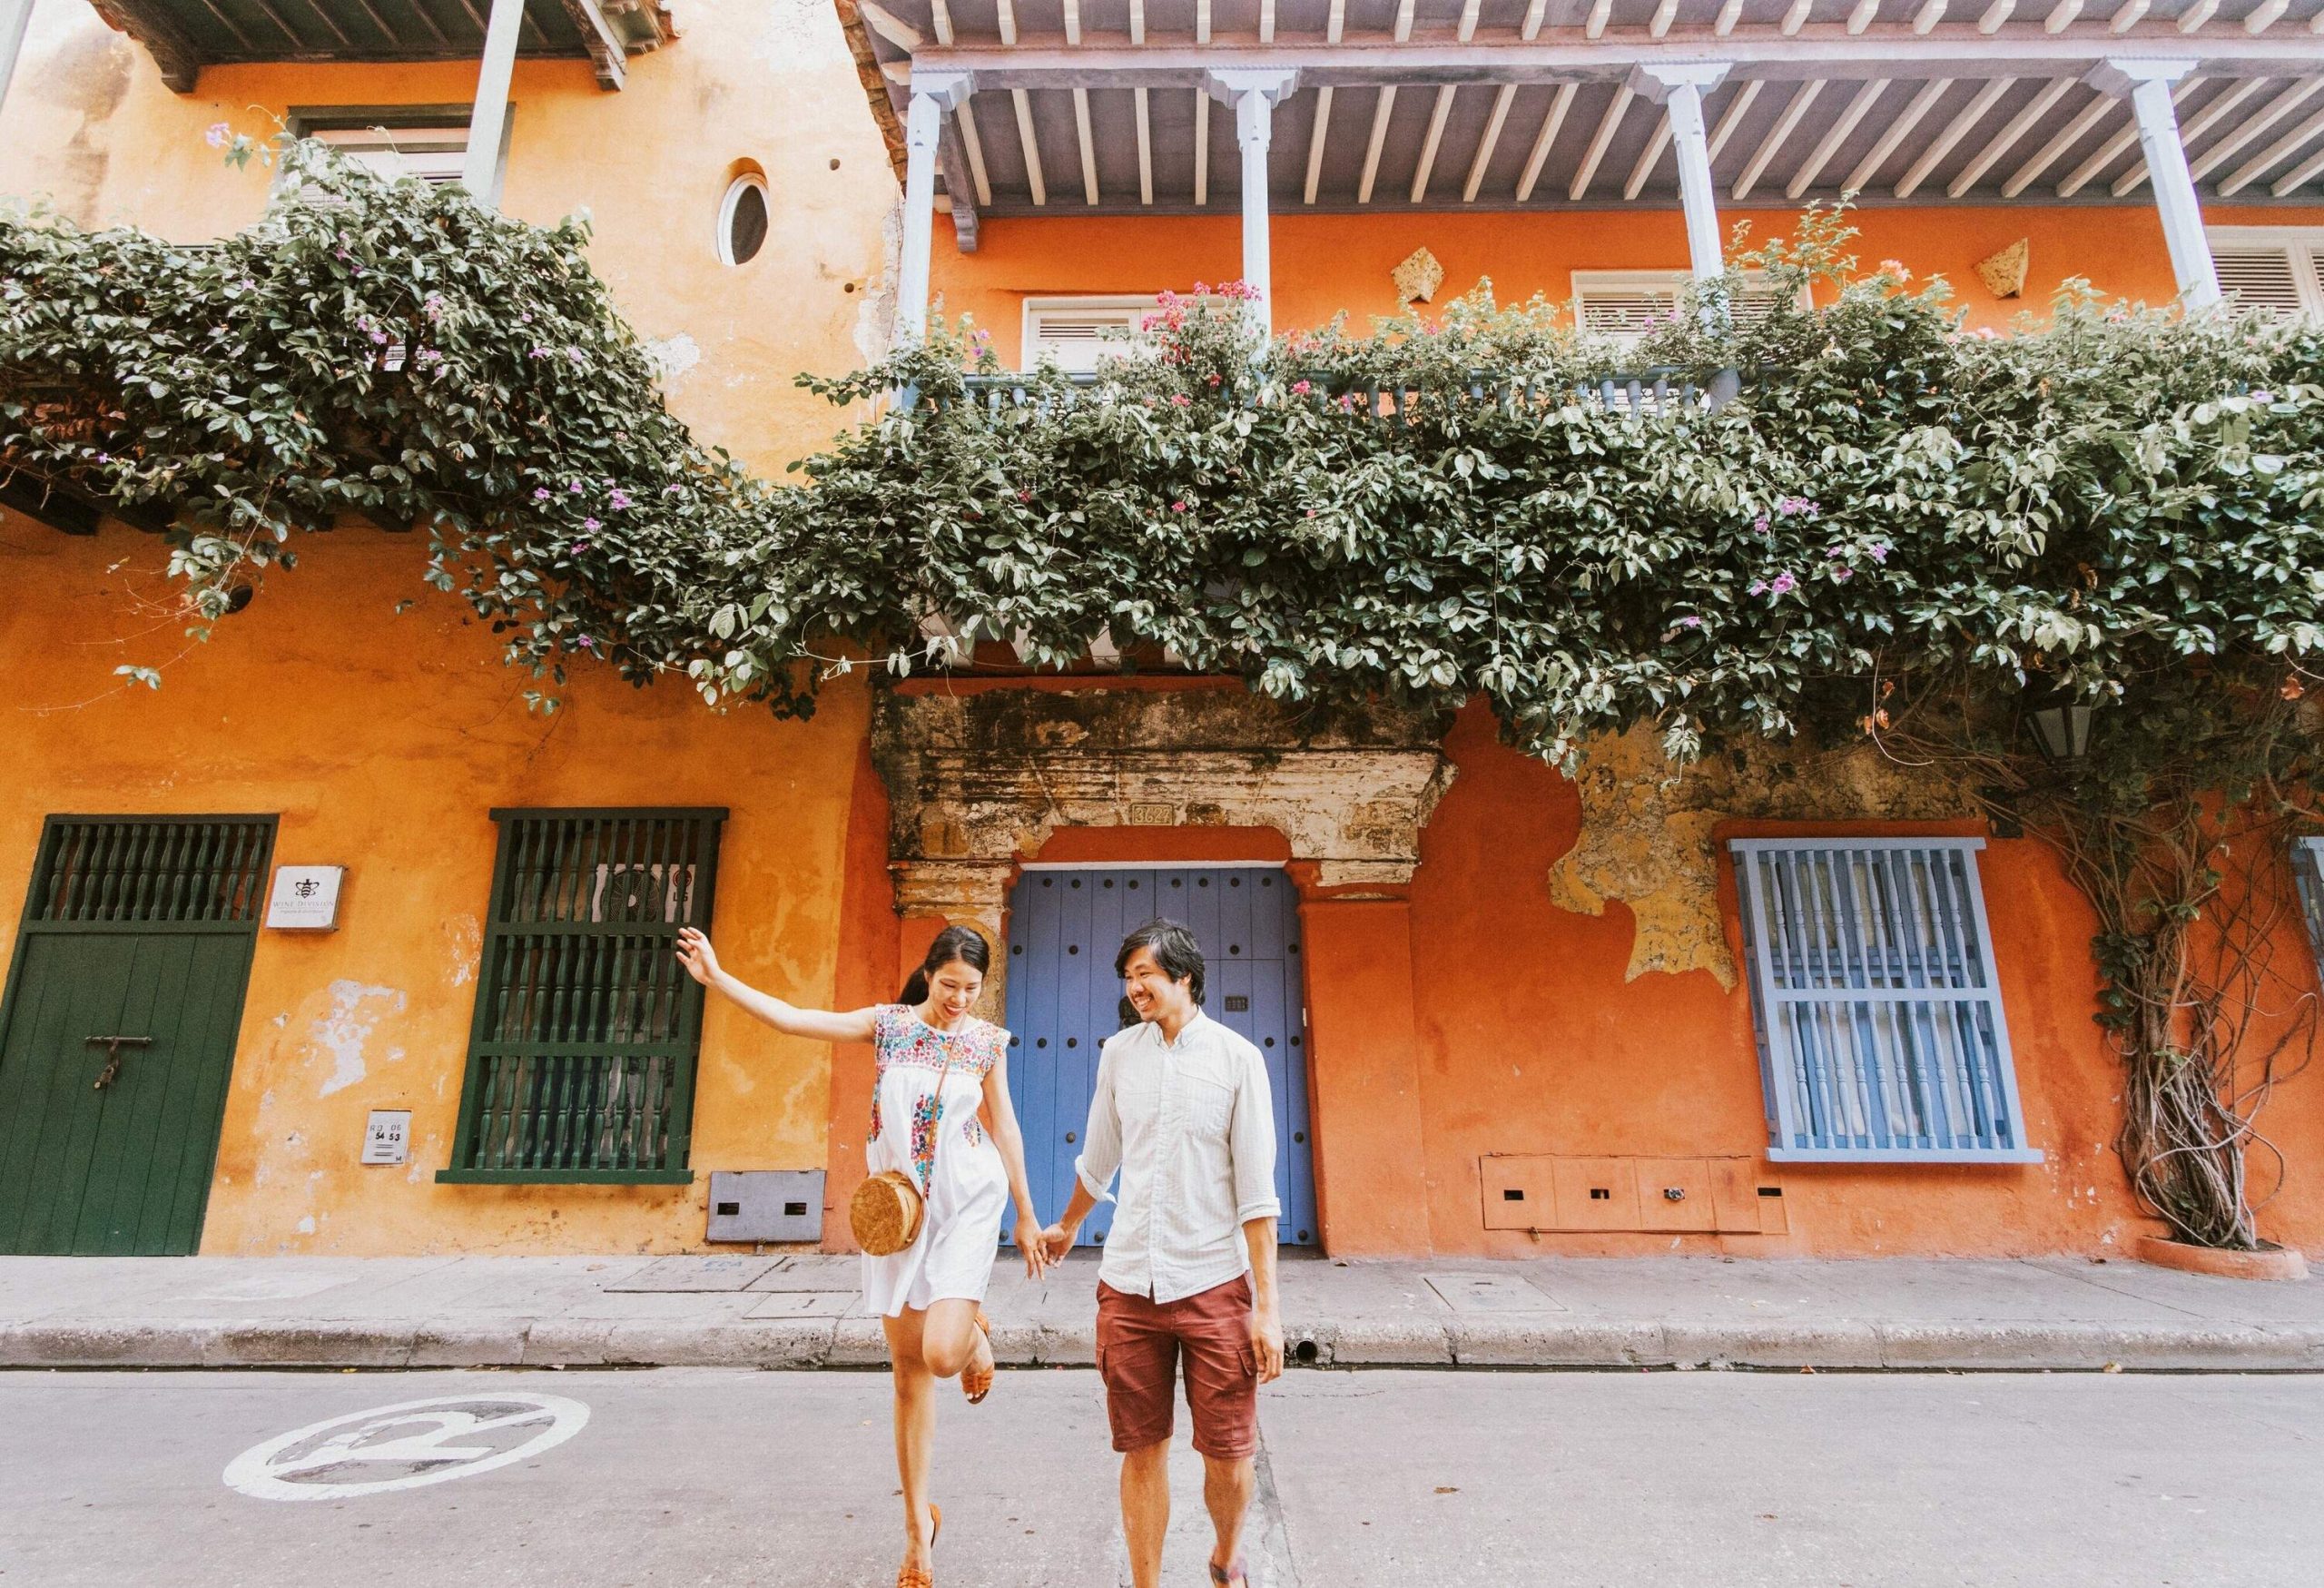 A couple in casual clothes holds hands as they stand in front of an orange house with green vines all over its balcony.